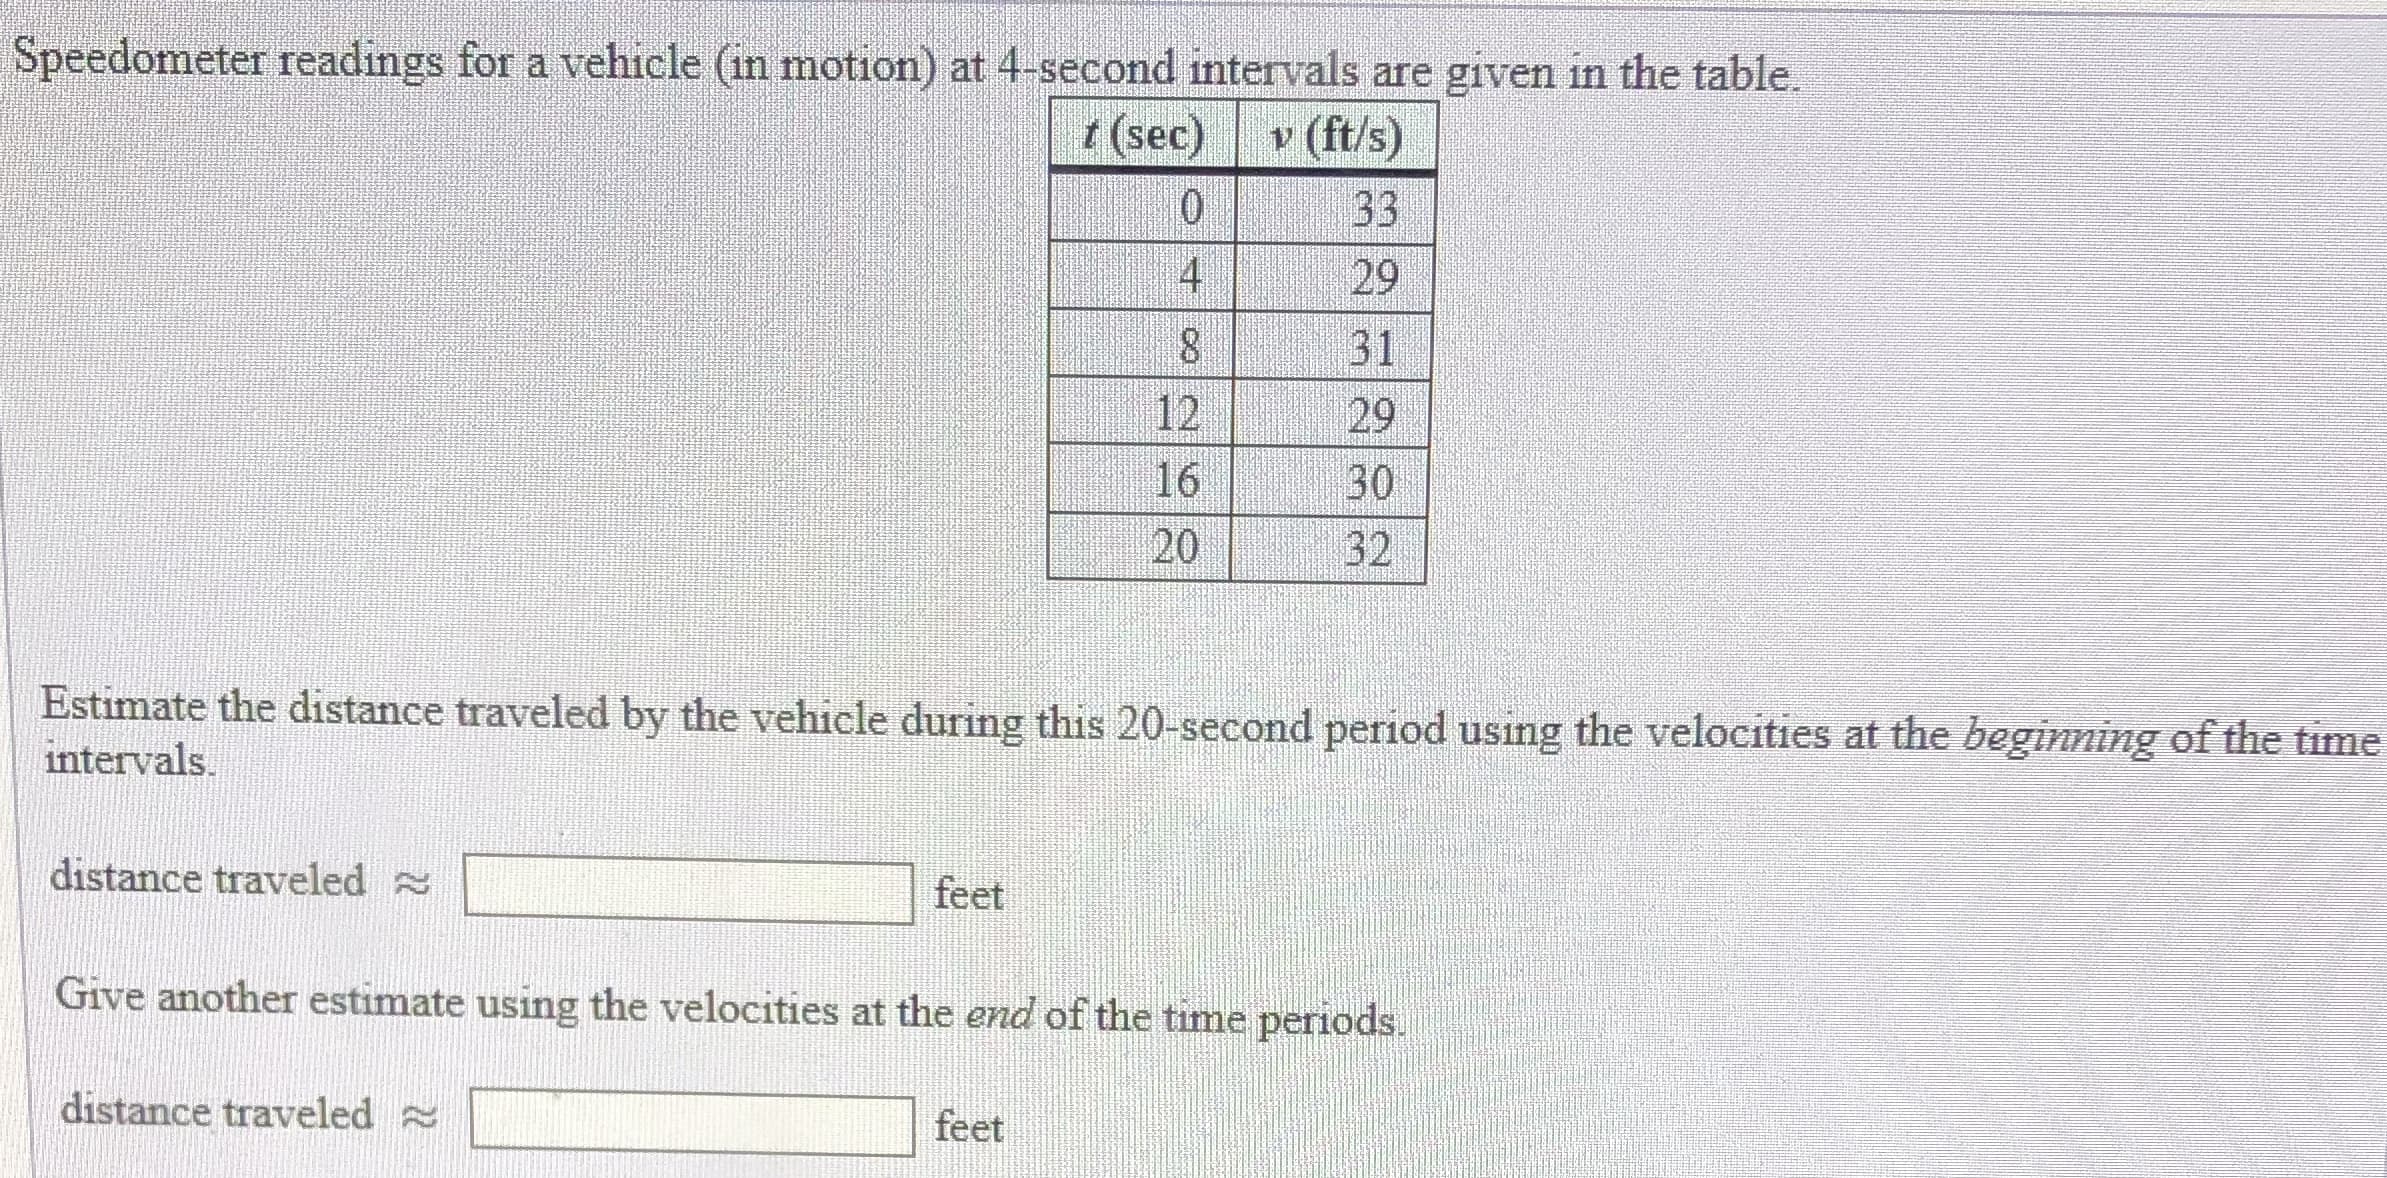 Speedometer readings for a vehicle (in motion) at 4-second intervals are given in the table.
t (sec)
v (ft/s)
33
4
29
8.
31
12
29
16
30
20
32
